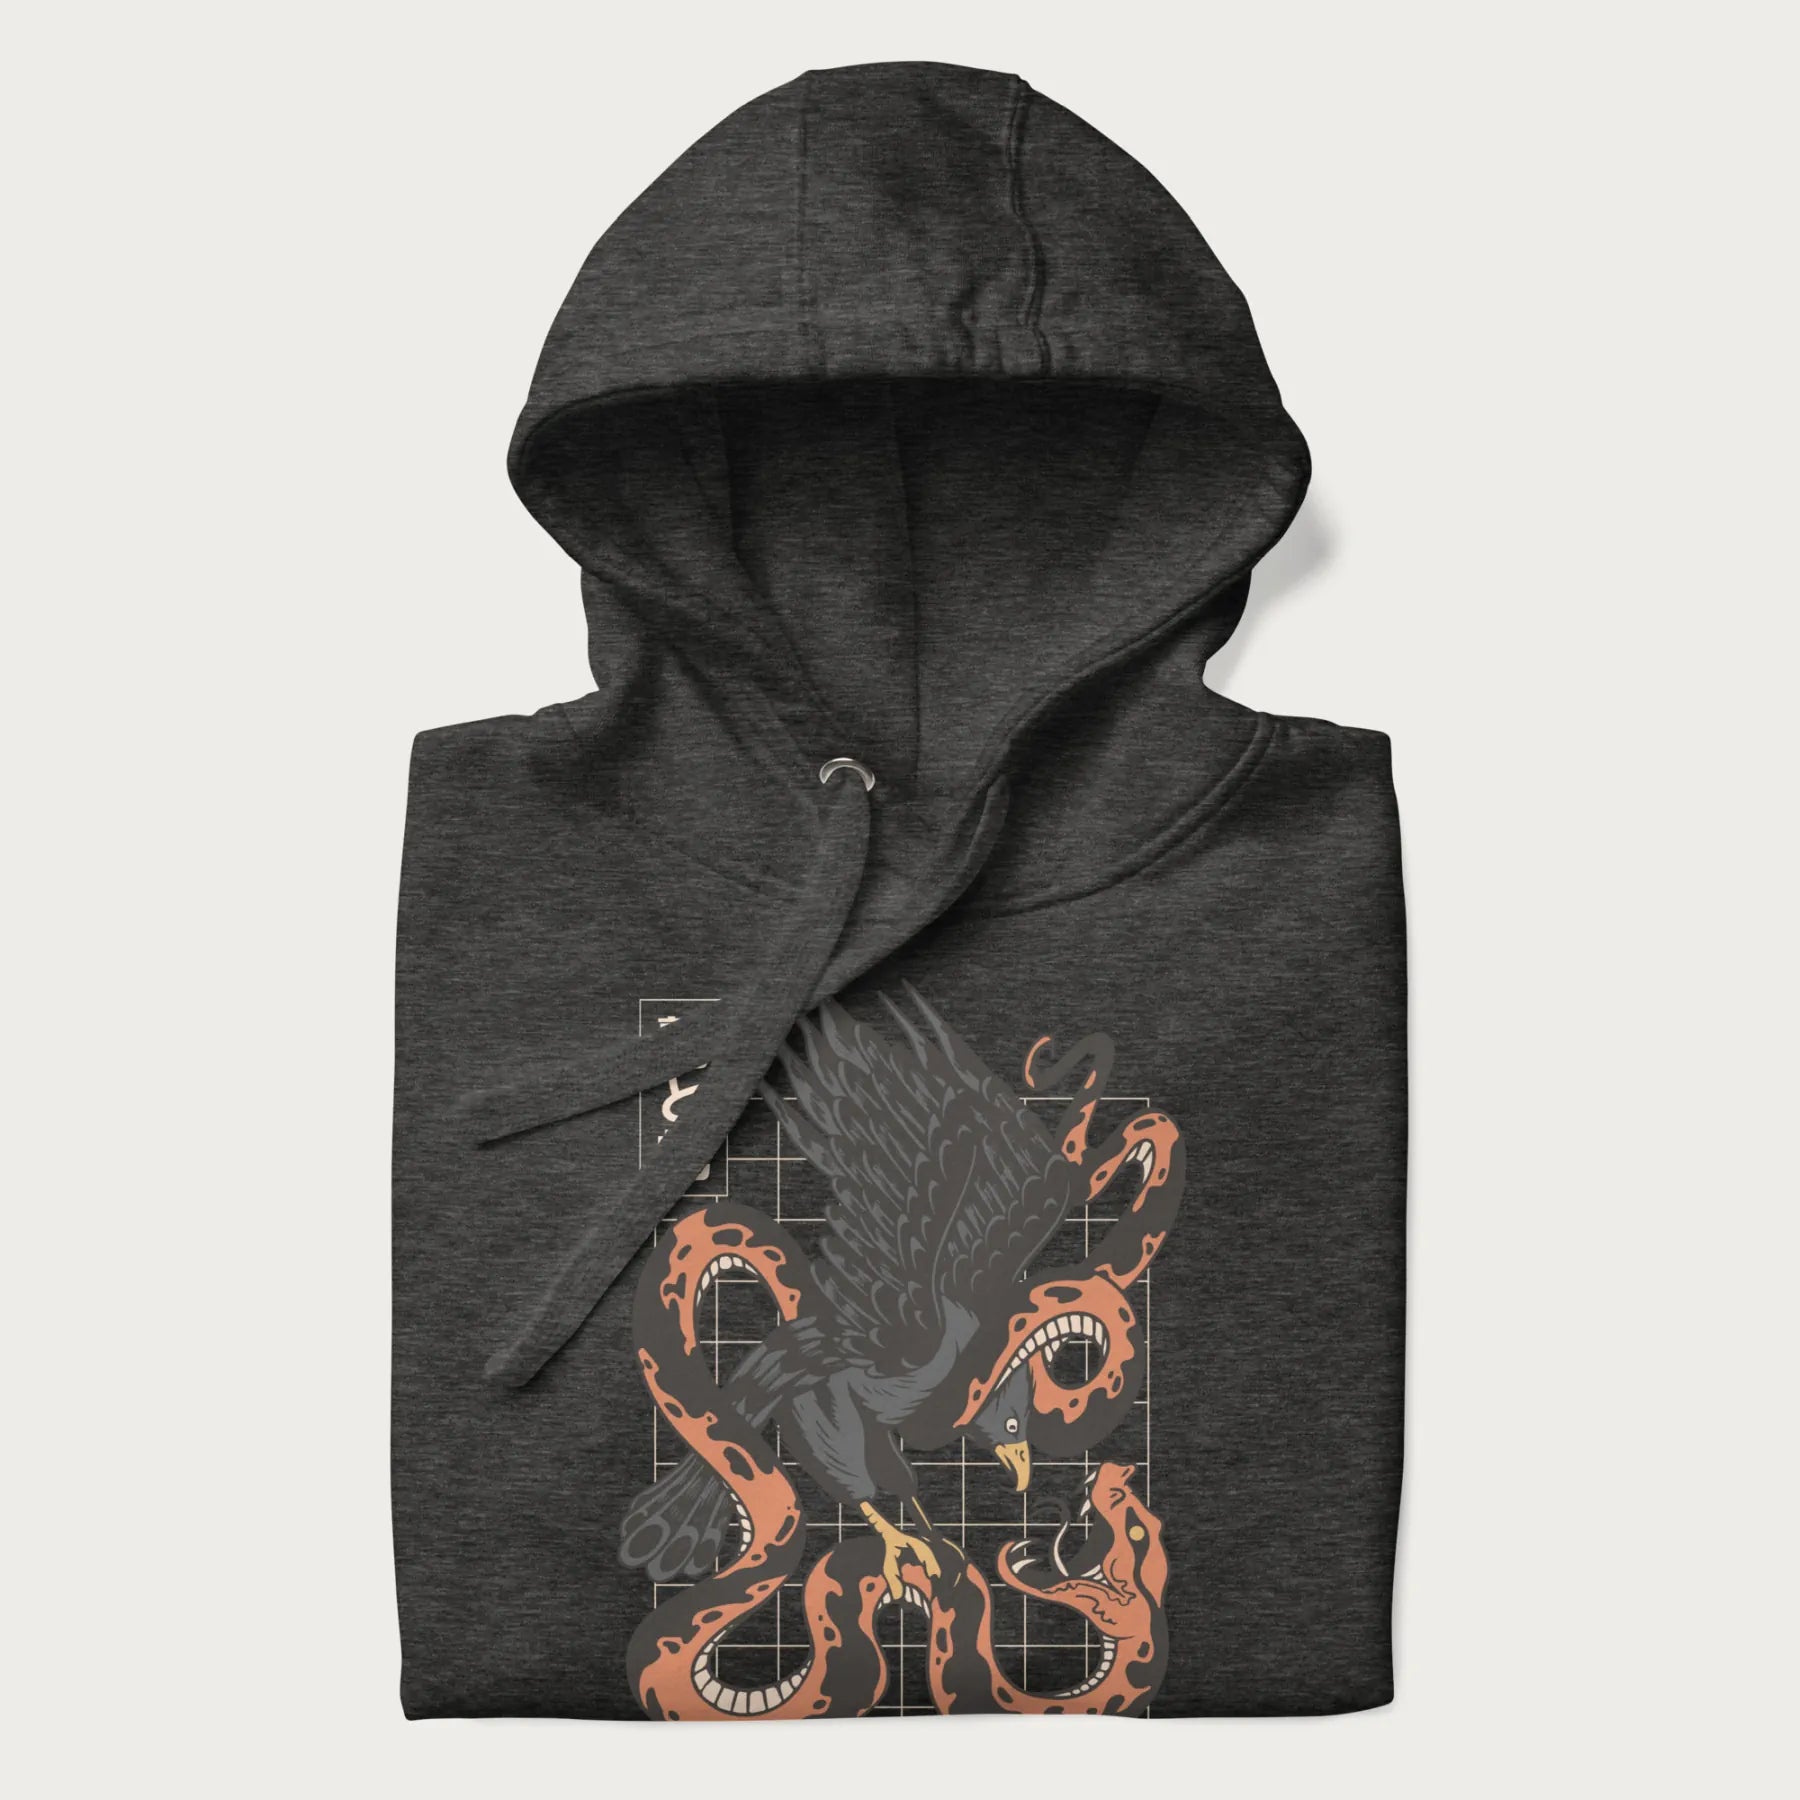 Folded dark grey hoodie with Japanese text and a graphic of an eagle battling a snake, with the text 'Tokyo Japan' underneath.